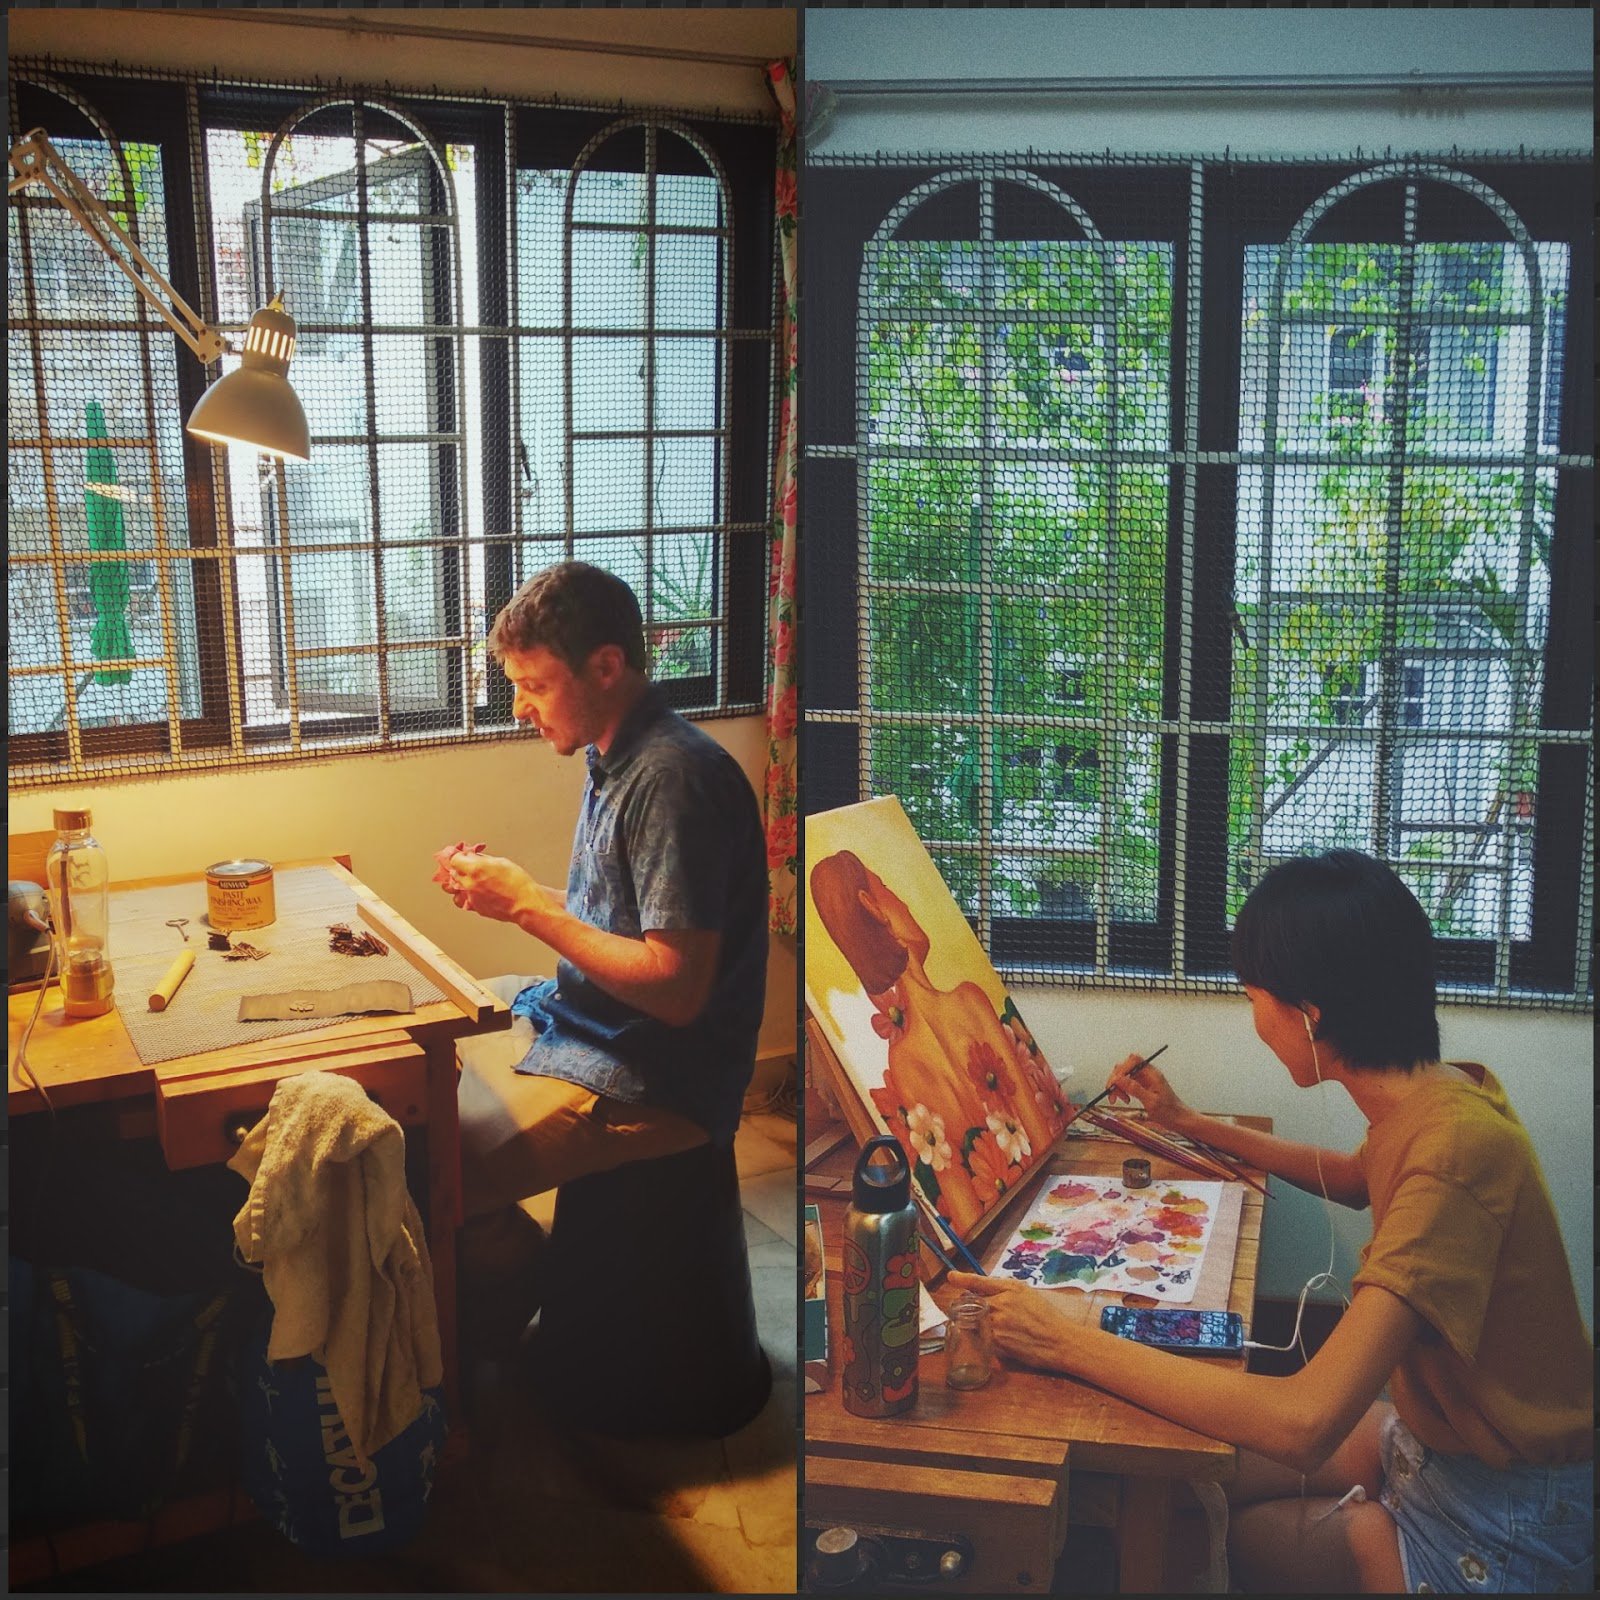 Artists / Makers utilizing the craft room